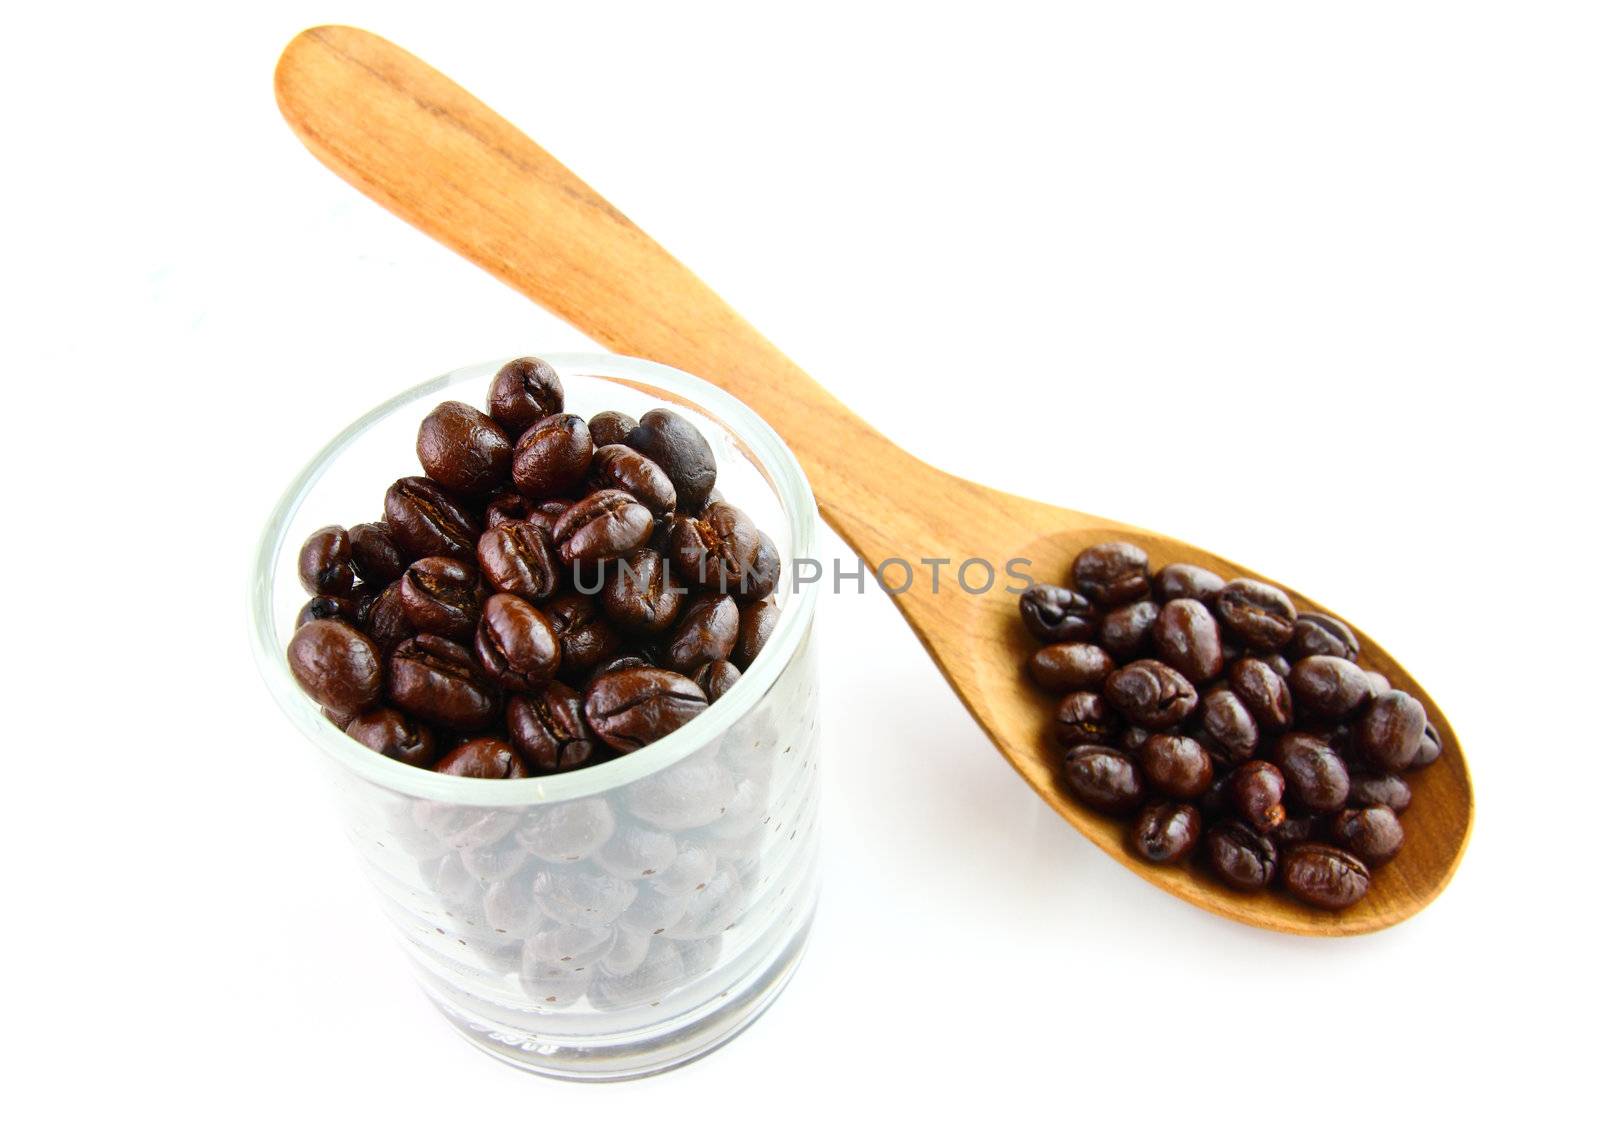 Coffee beans in a glass with wooden spoon on white background  by nuchylee